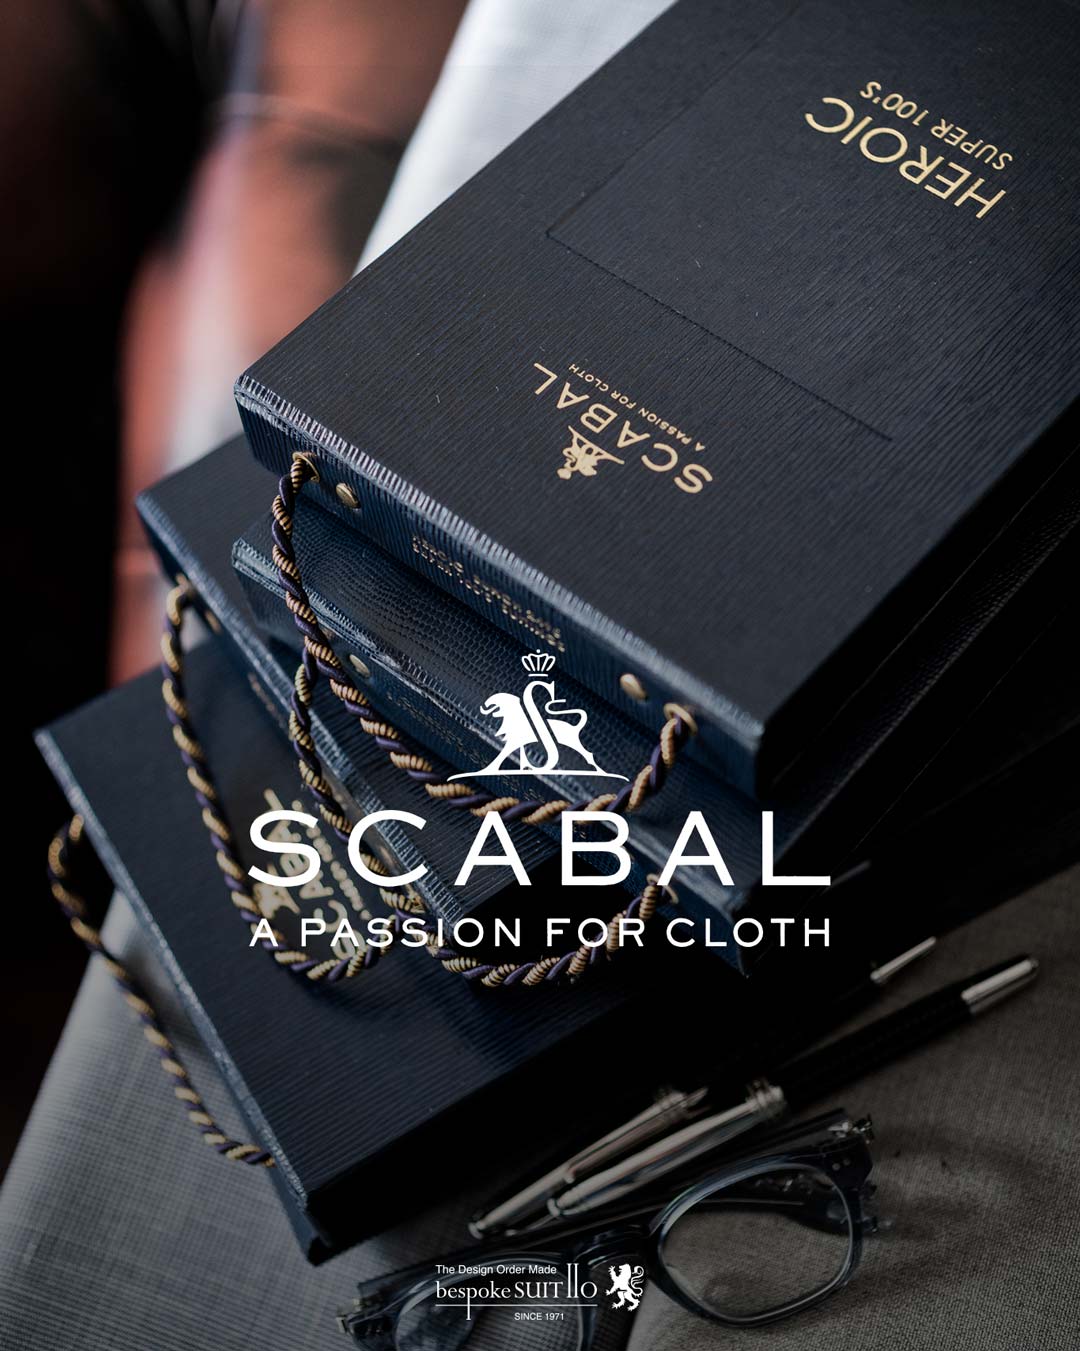 ☆SCABAL（スキャバル）フェアー ～30%OFF｜